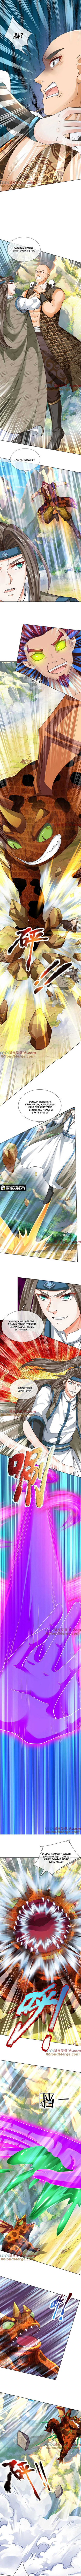 Star Sign In To Supreme Dantian Chapter 290